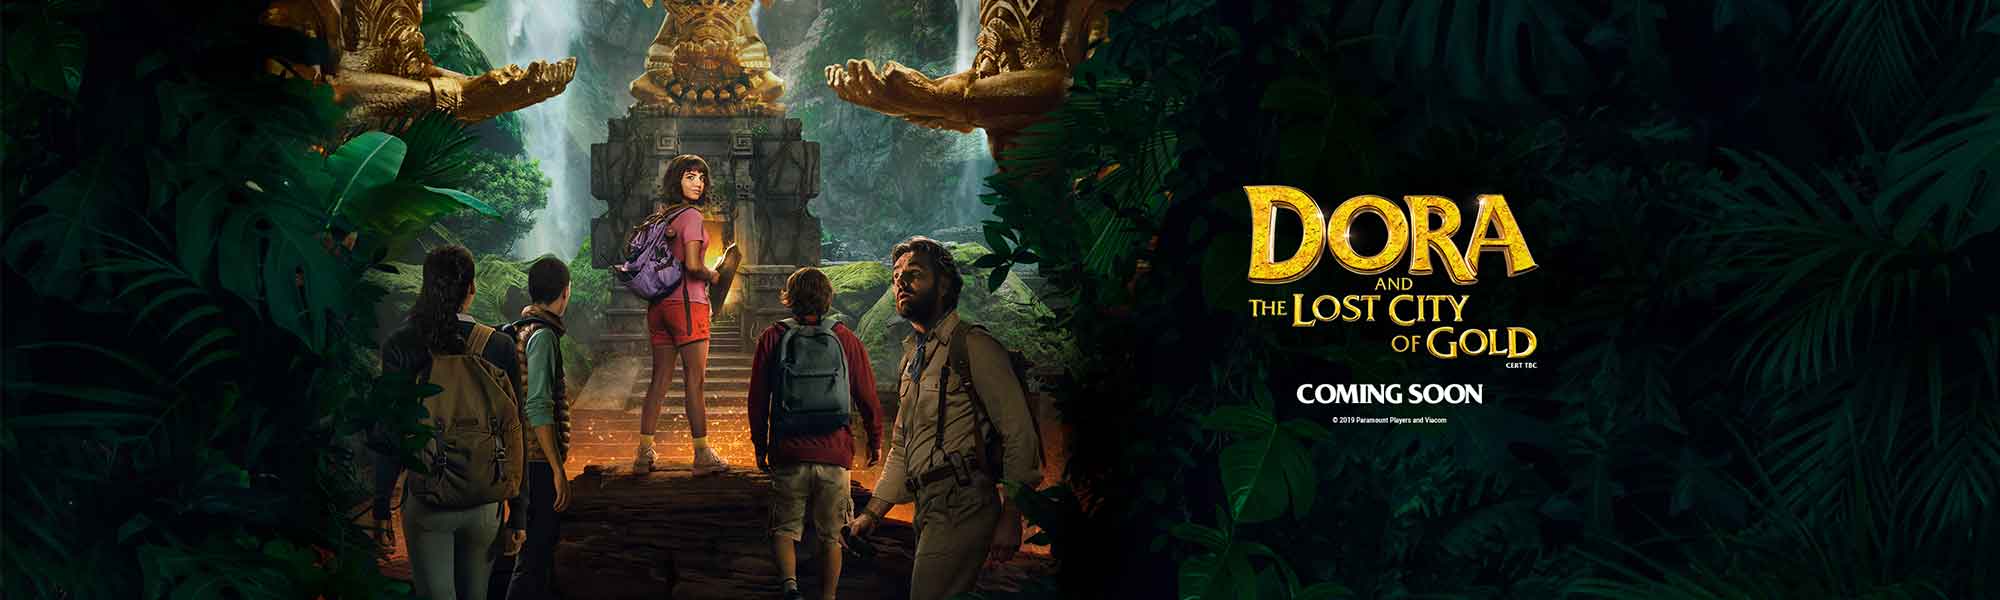 DORA AND THE LOST CITY OF GOLD